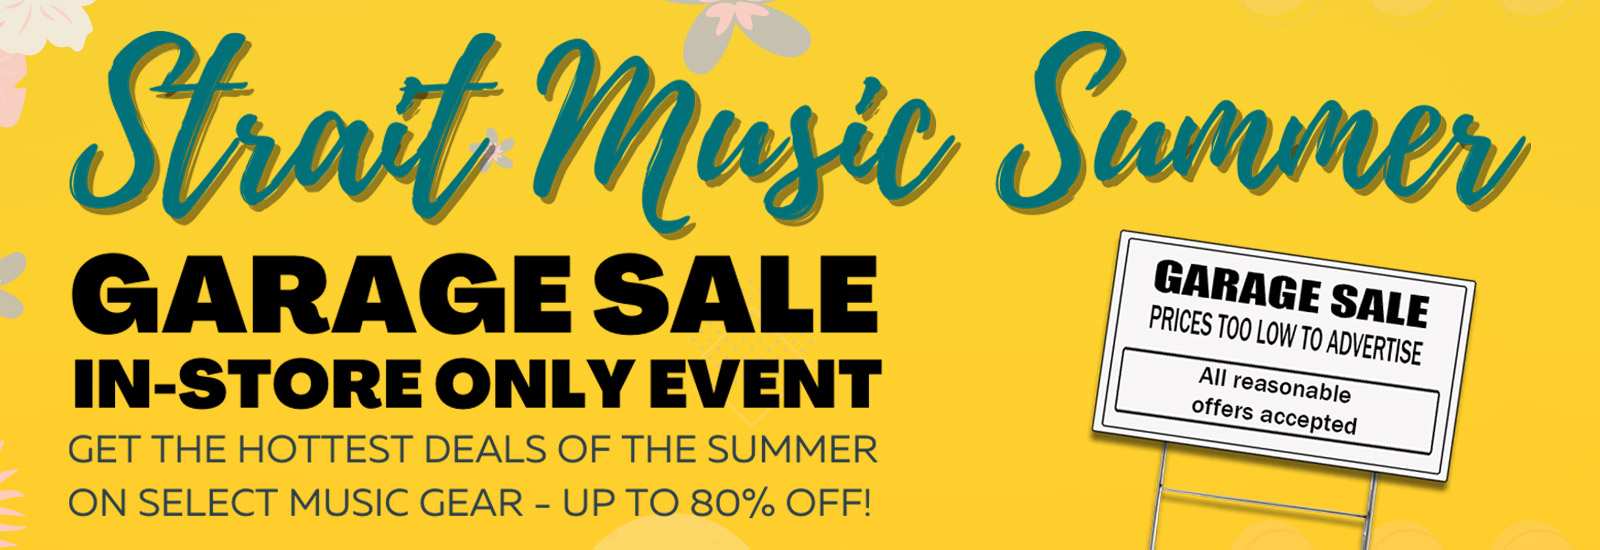 Strait Music Summer Garage Sale In-Store ONLY Event Happening Now